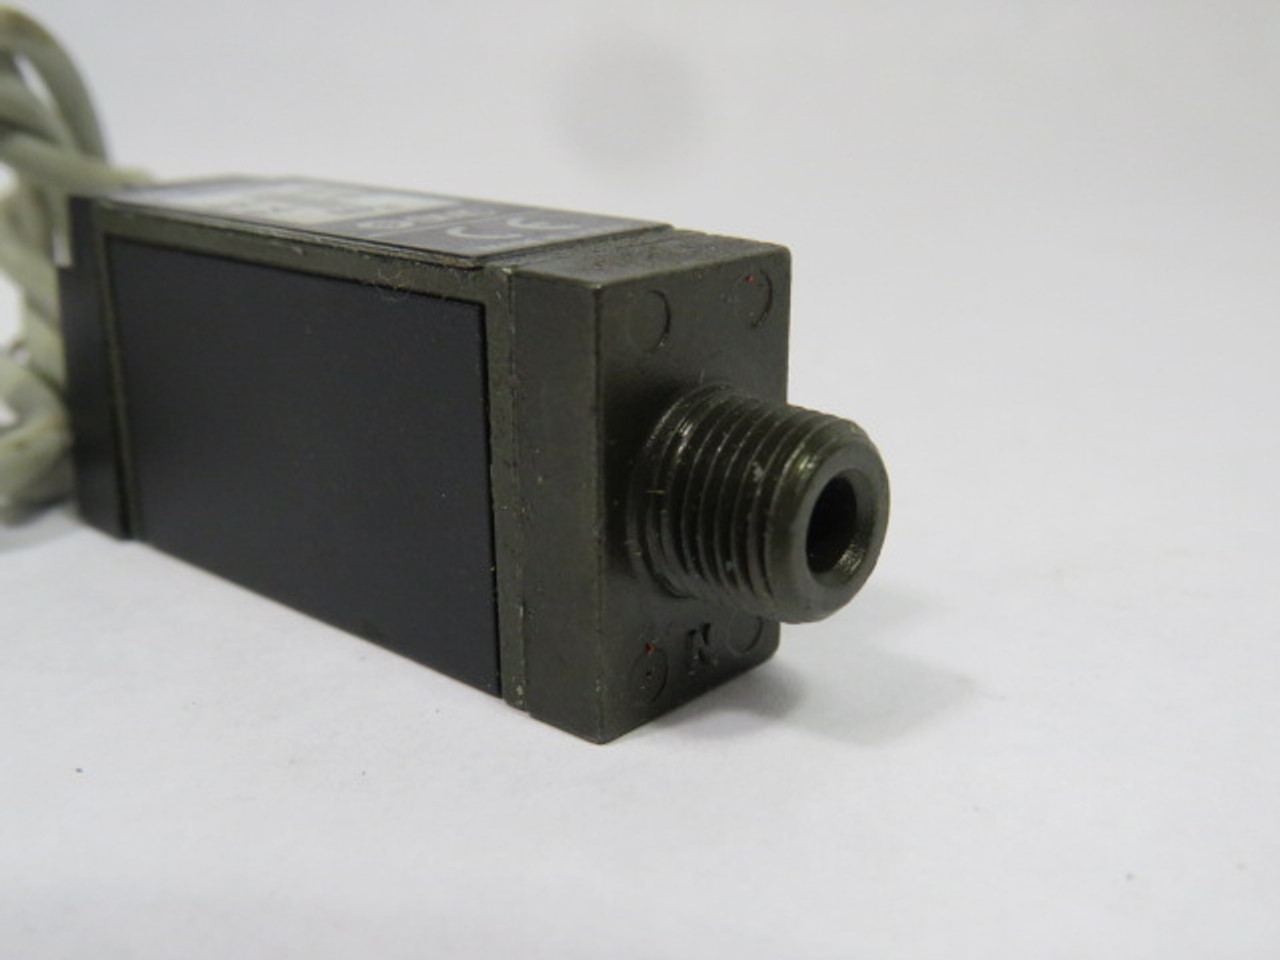 SMC IS1000-01 Pressure Switch 0.1-0.4MPa USED